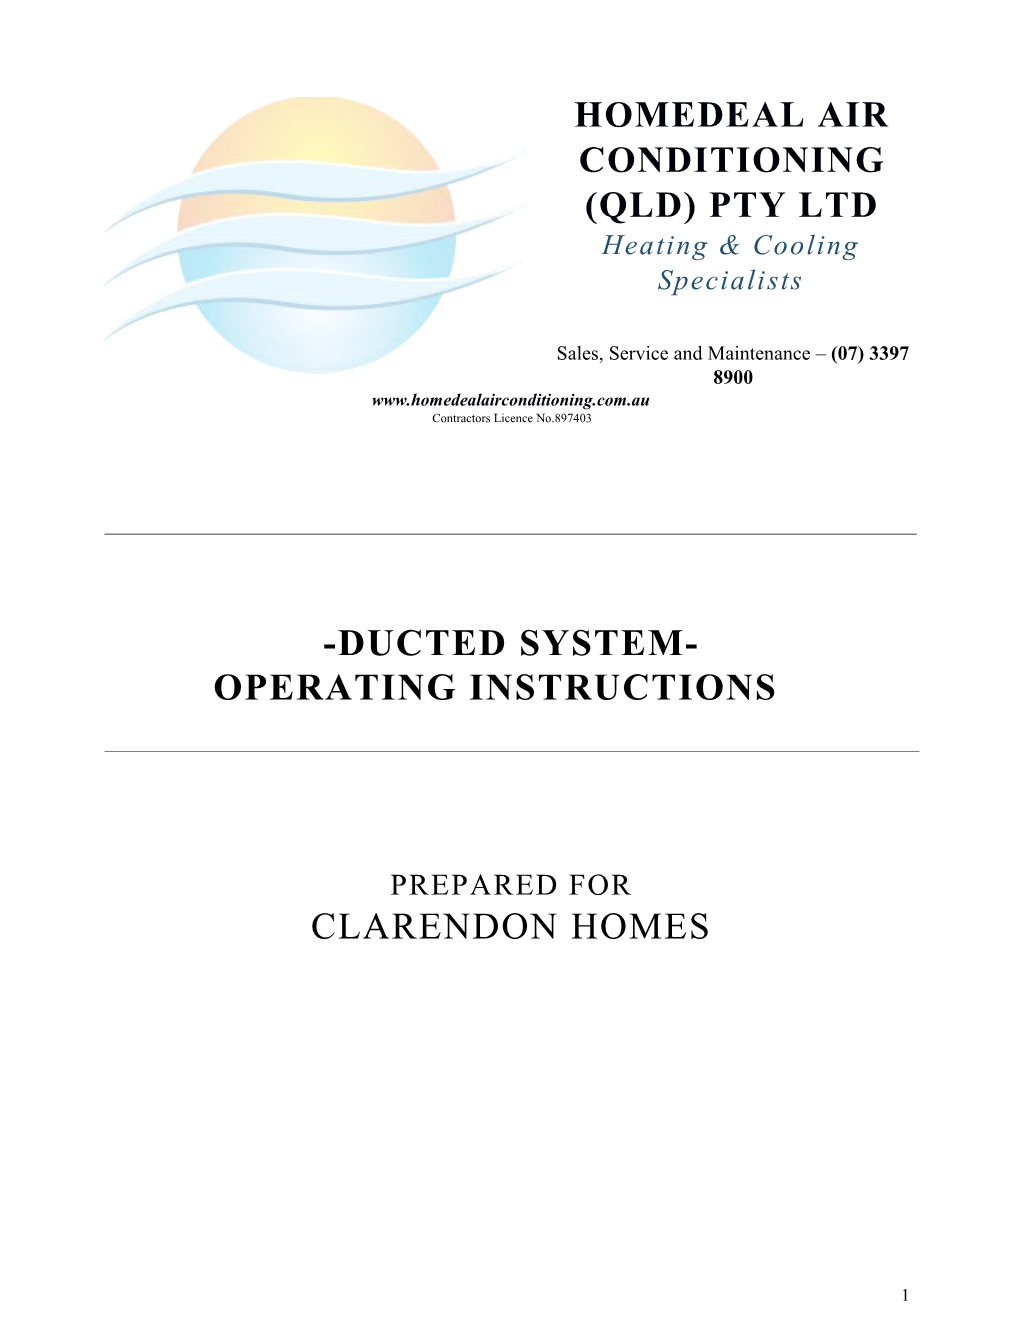 QLD Clarendon Operating Instructions 2015